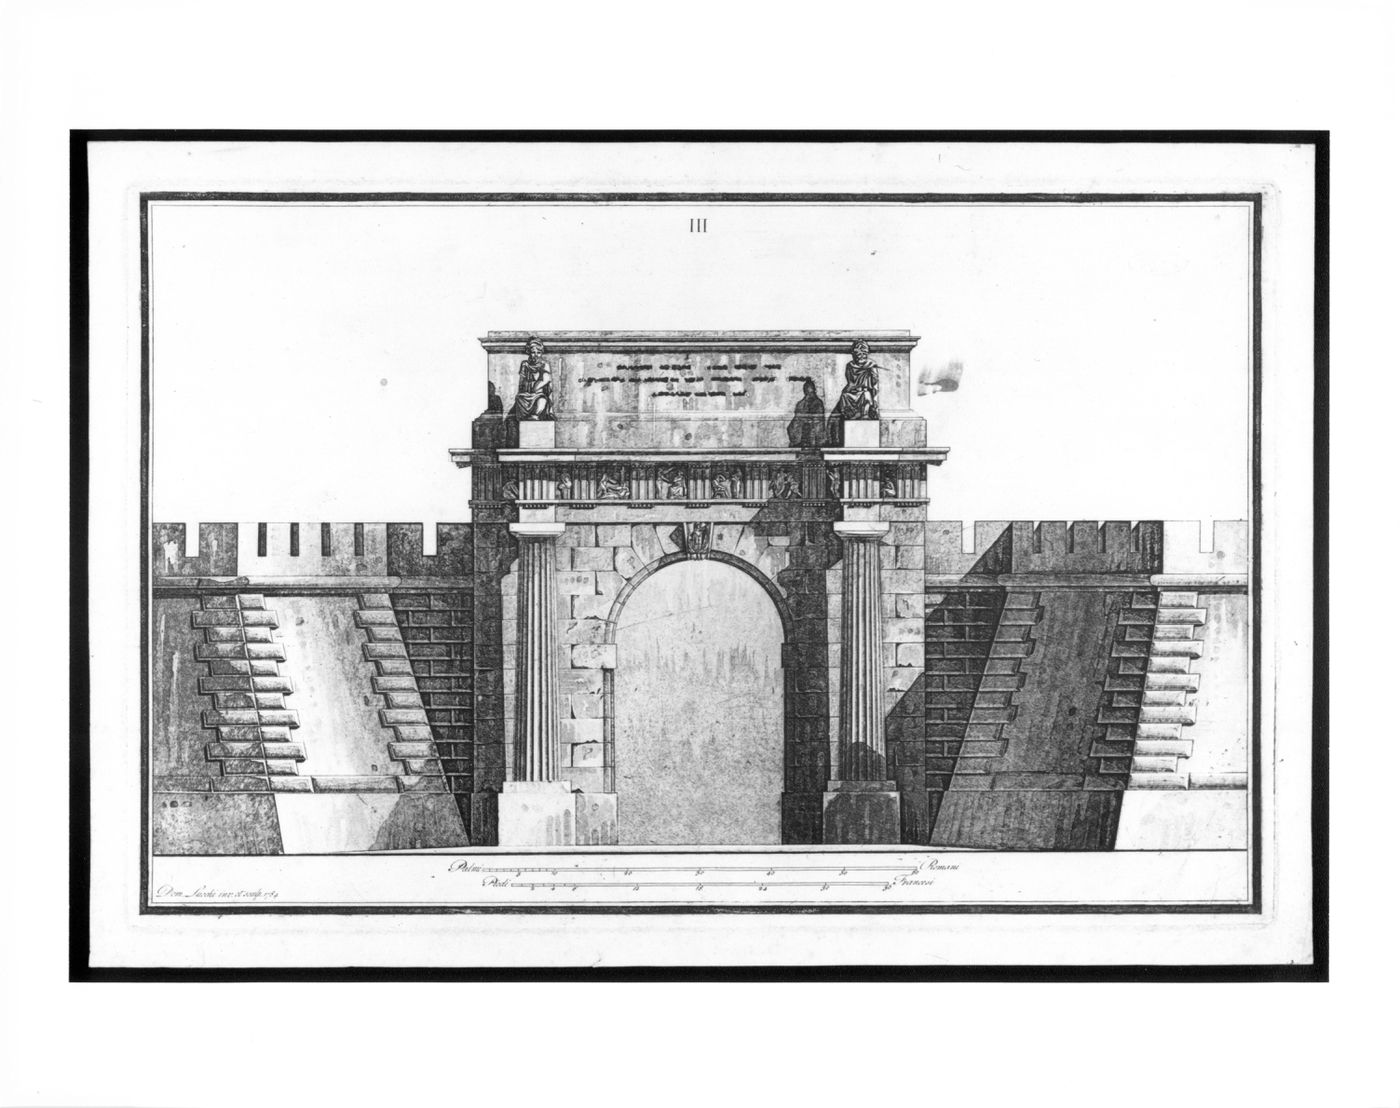 Designs for fortified gates